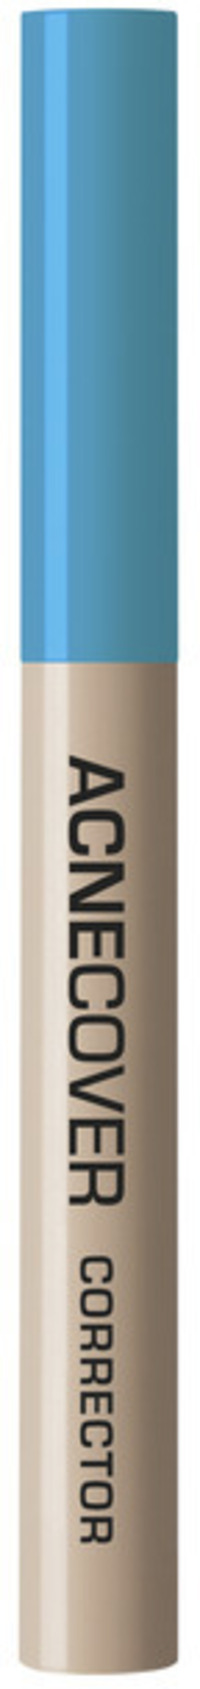 dermacol Acnecover make up 2 30ml